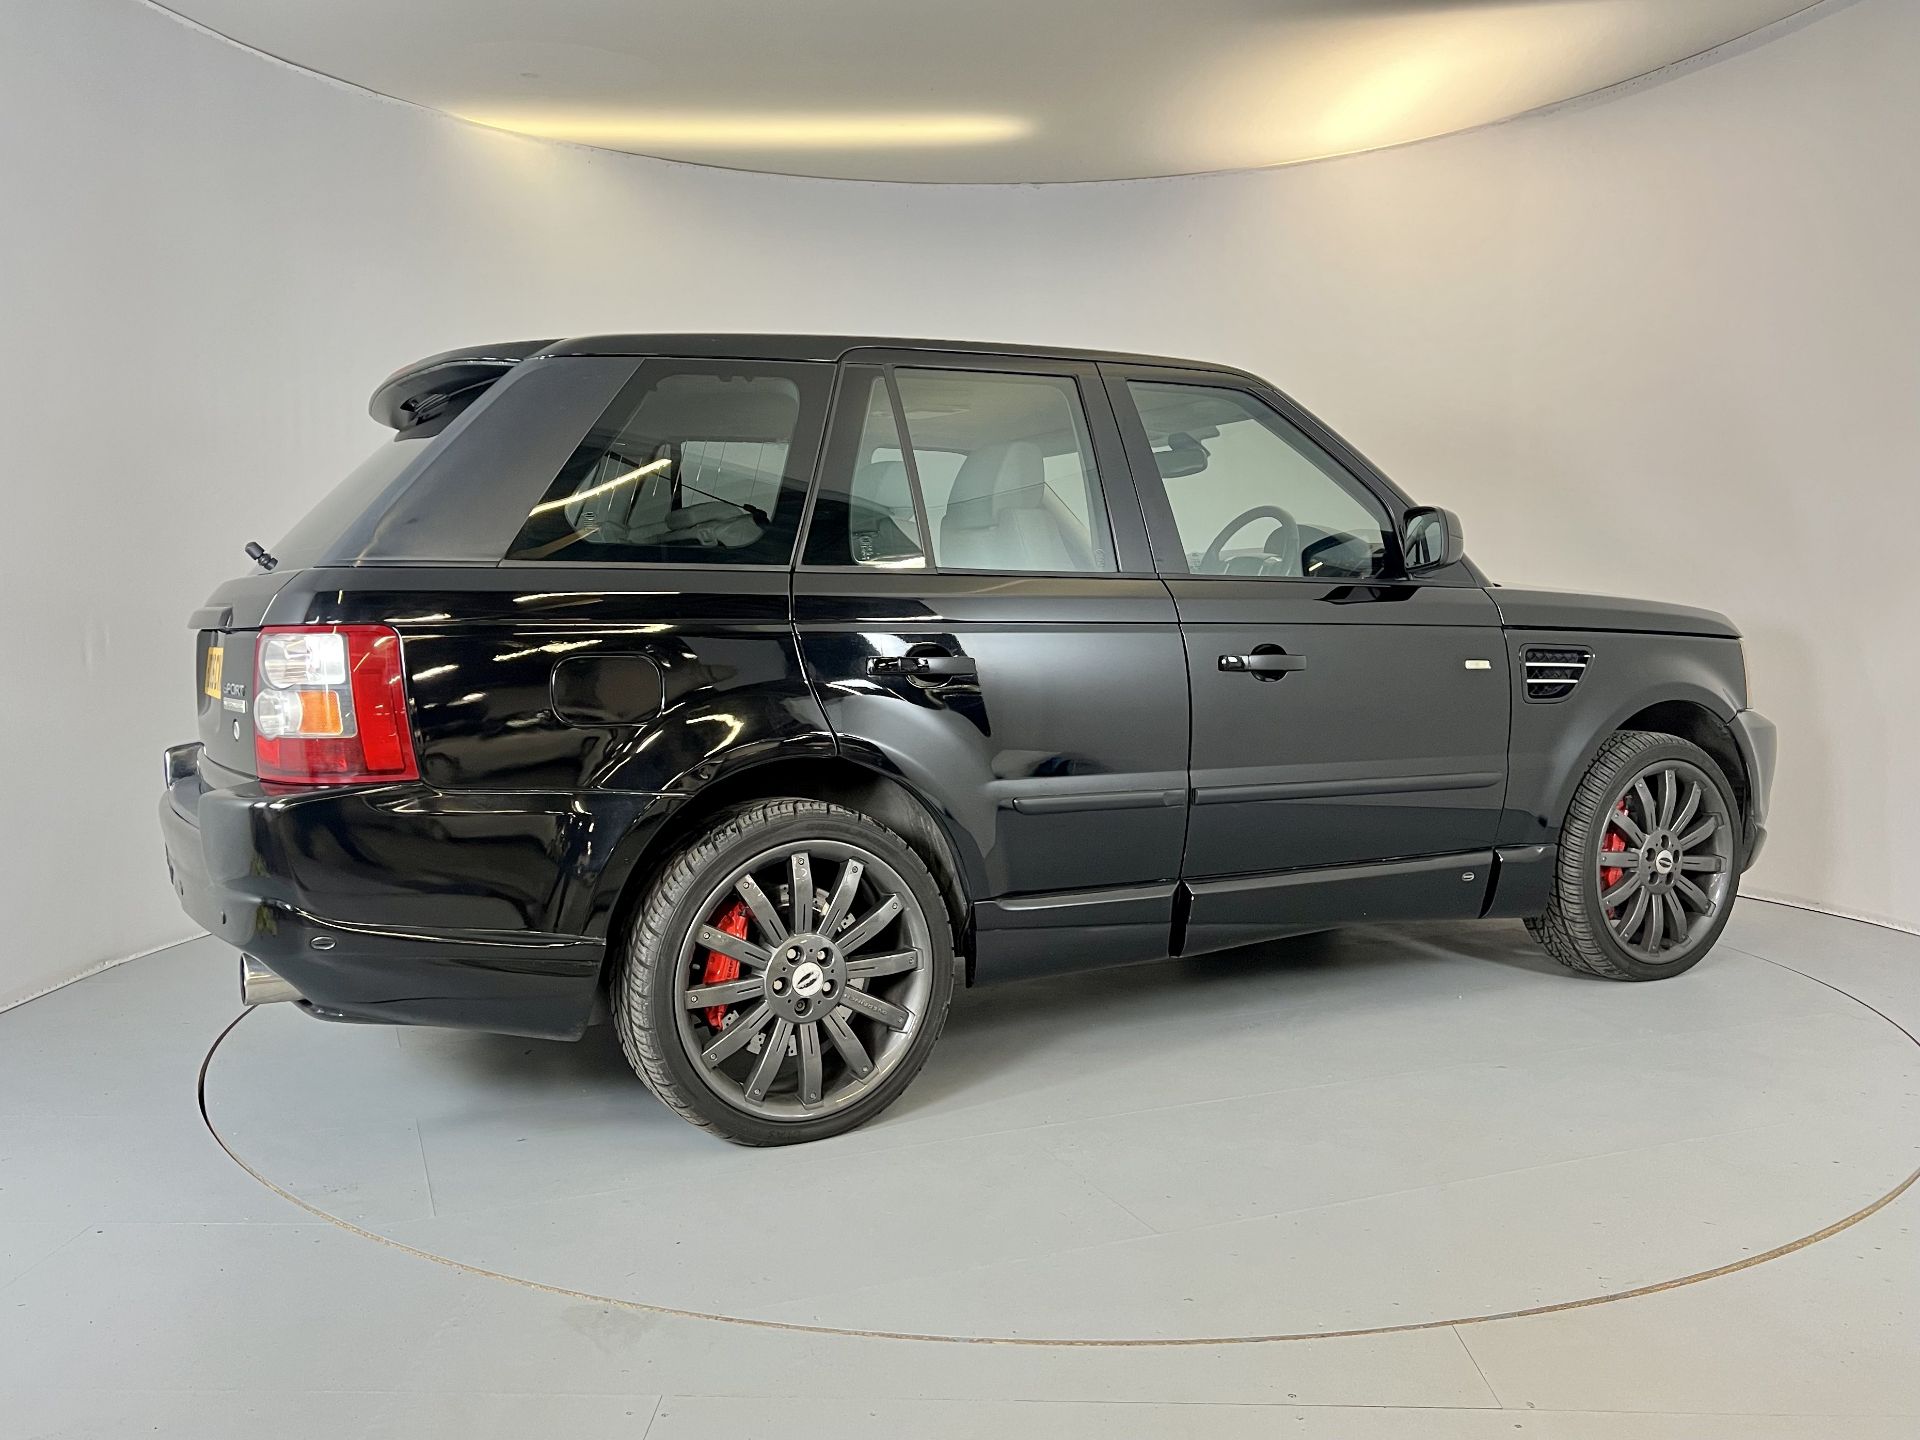 Range Rover Sport 1st Edition 4.2 Supercharged OverFinch - Image 10 of 33